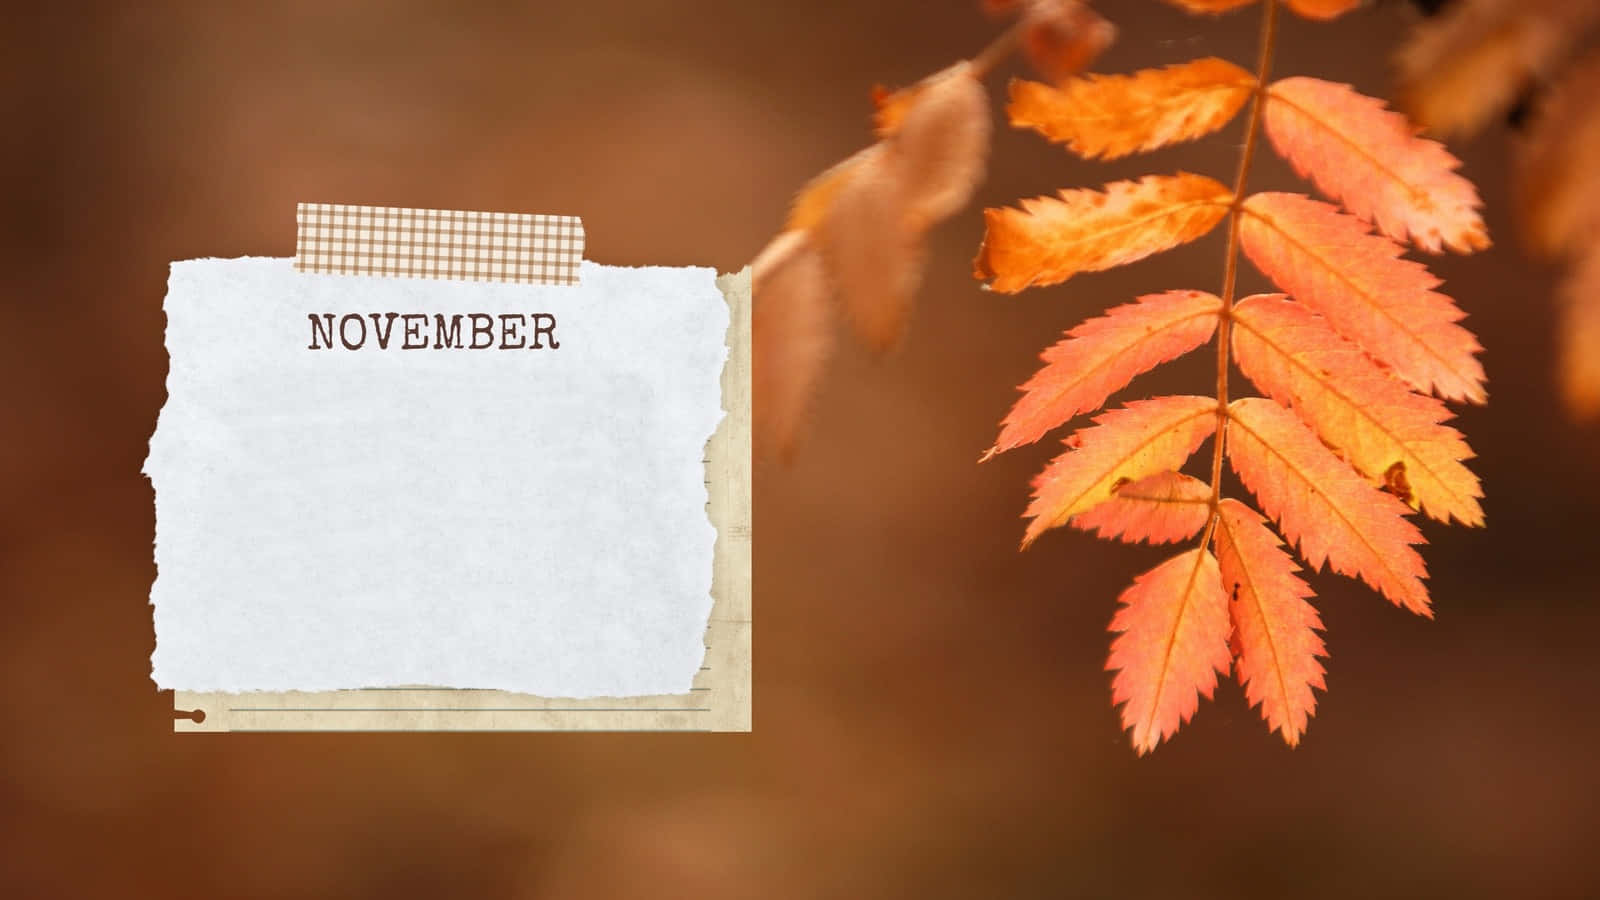 Welcome to Aesthetic November! Wallpaper